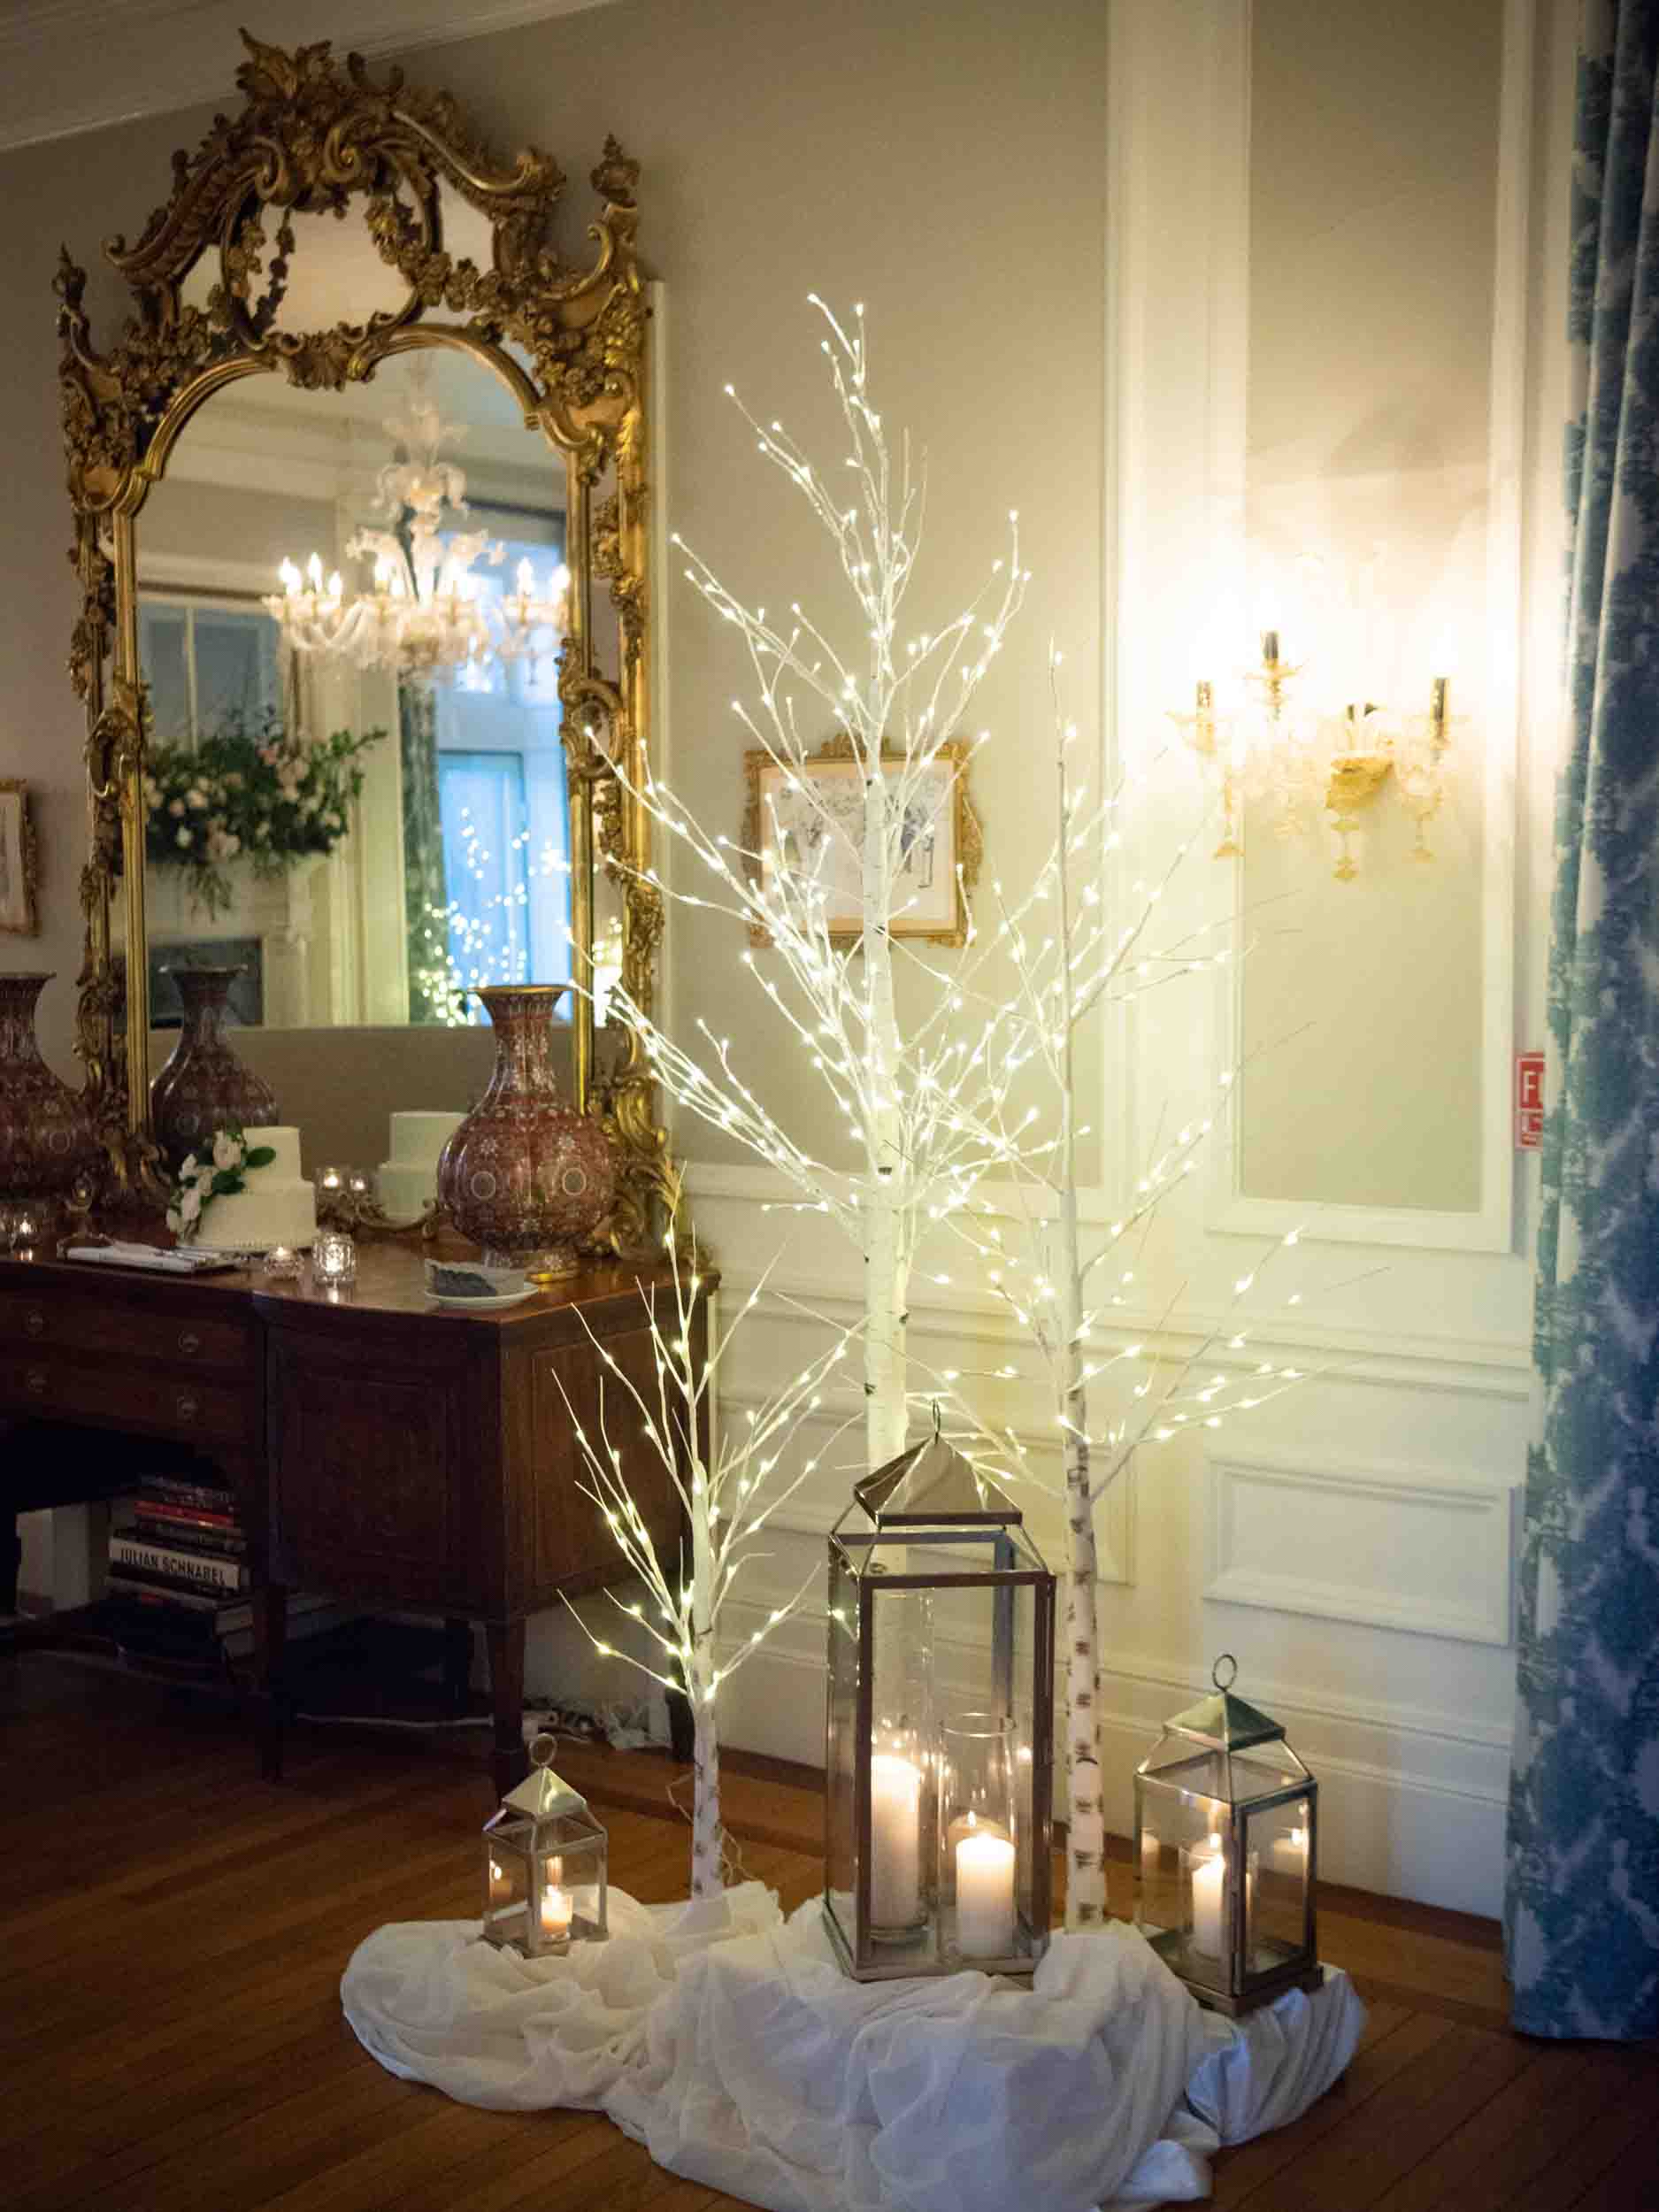 Cluster of white birch trees with sparkly lights, lanterns and candles